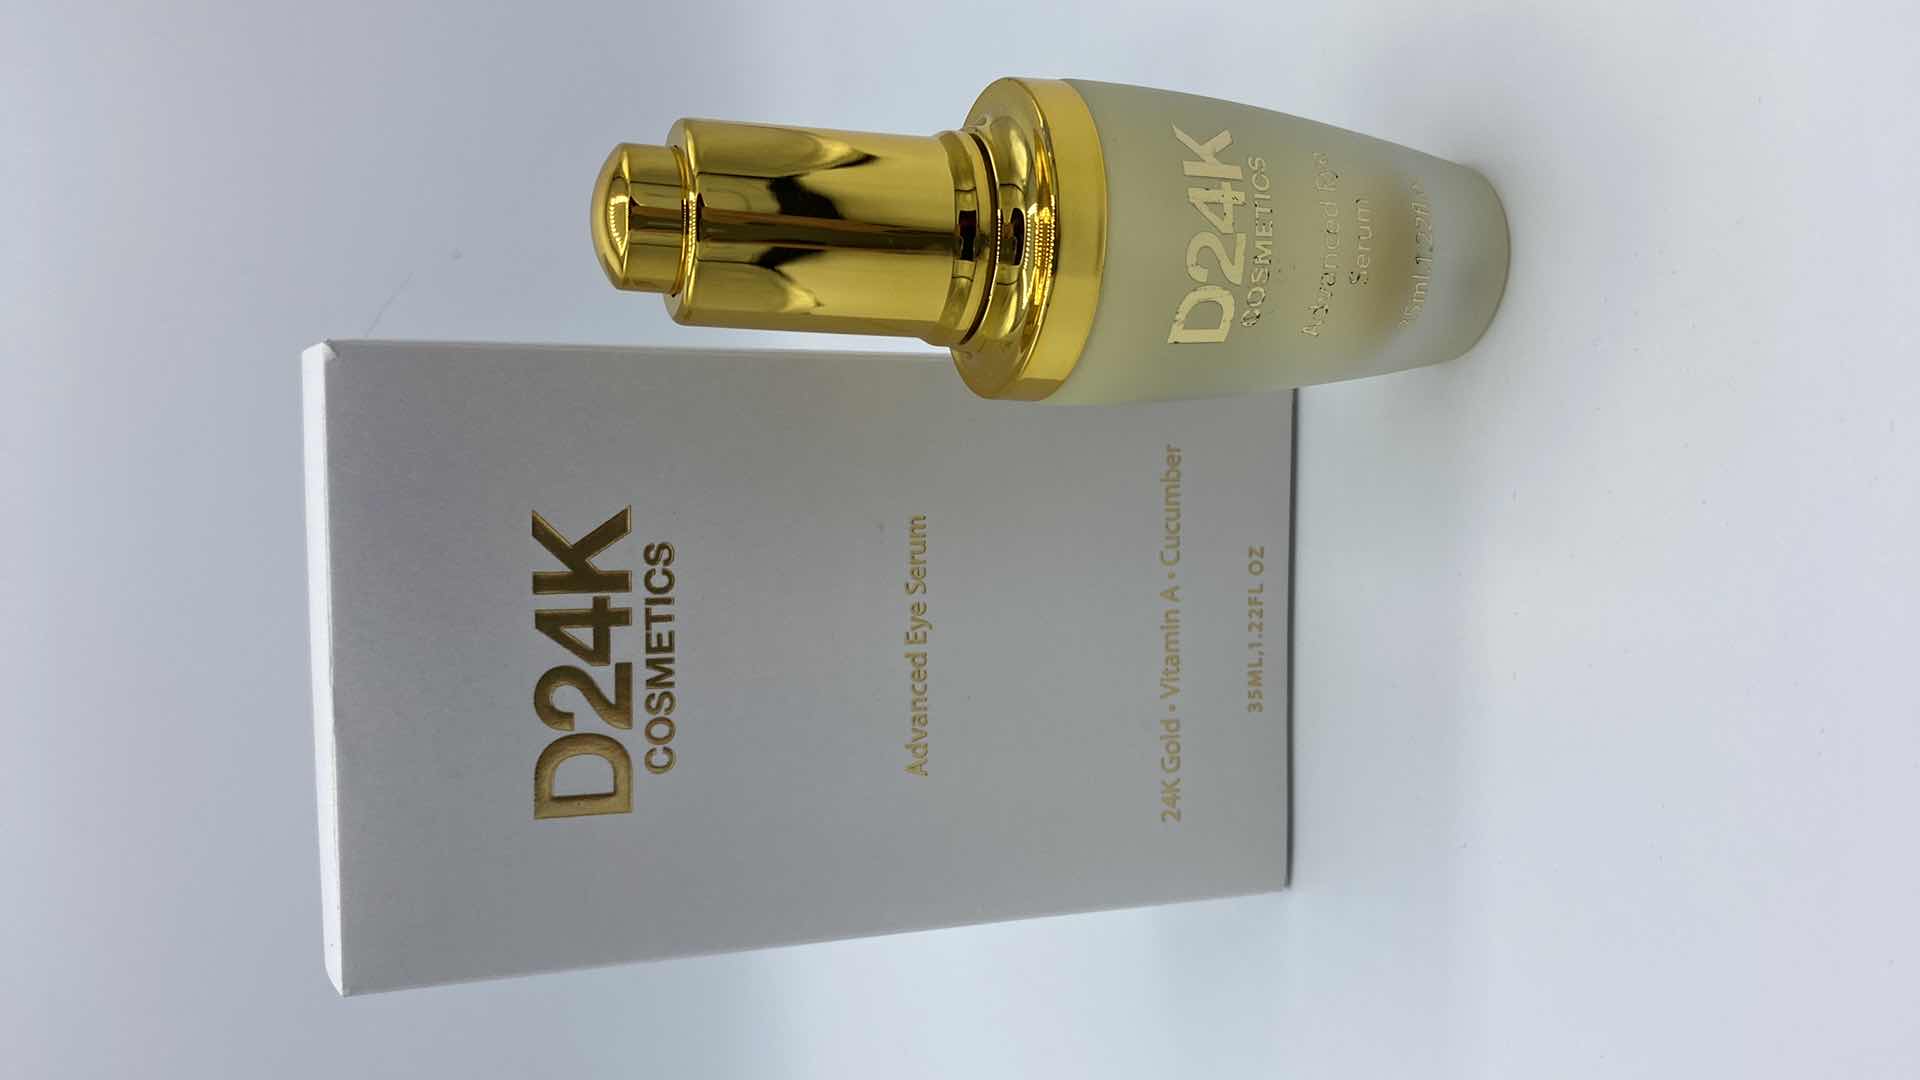 Photo 2 of NEW D24K ADVANCED EYE SERUM CONTOURS THE SKIN AROUND EYE AREA, SMOOTH TEXTURE REDUCE PUFFINESS AND SAGGING SKIN